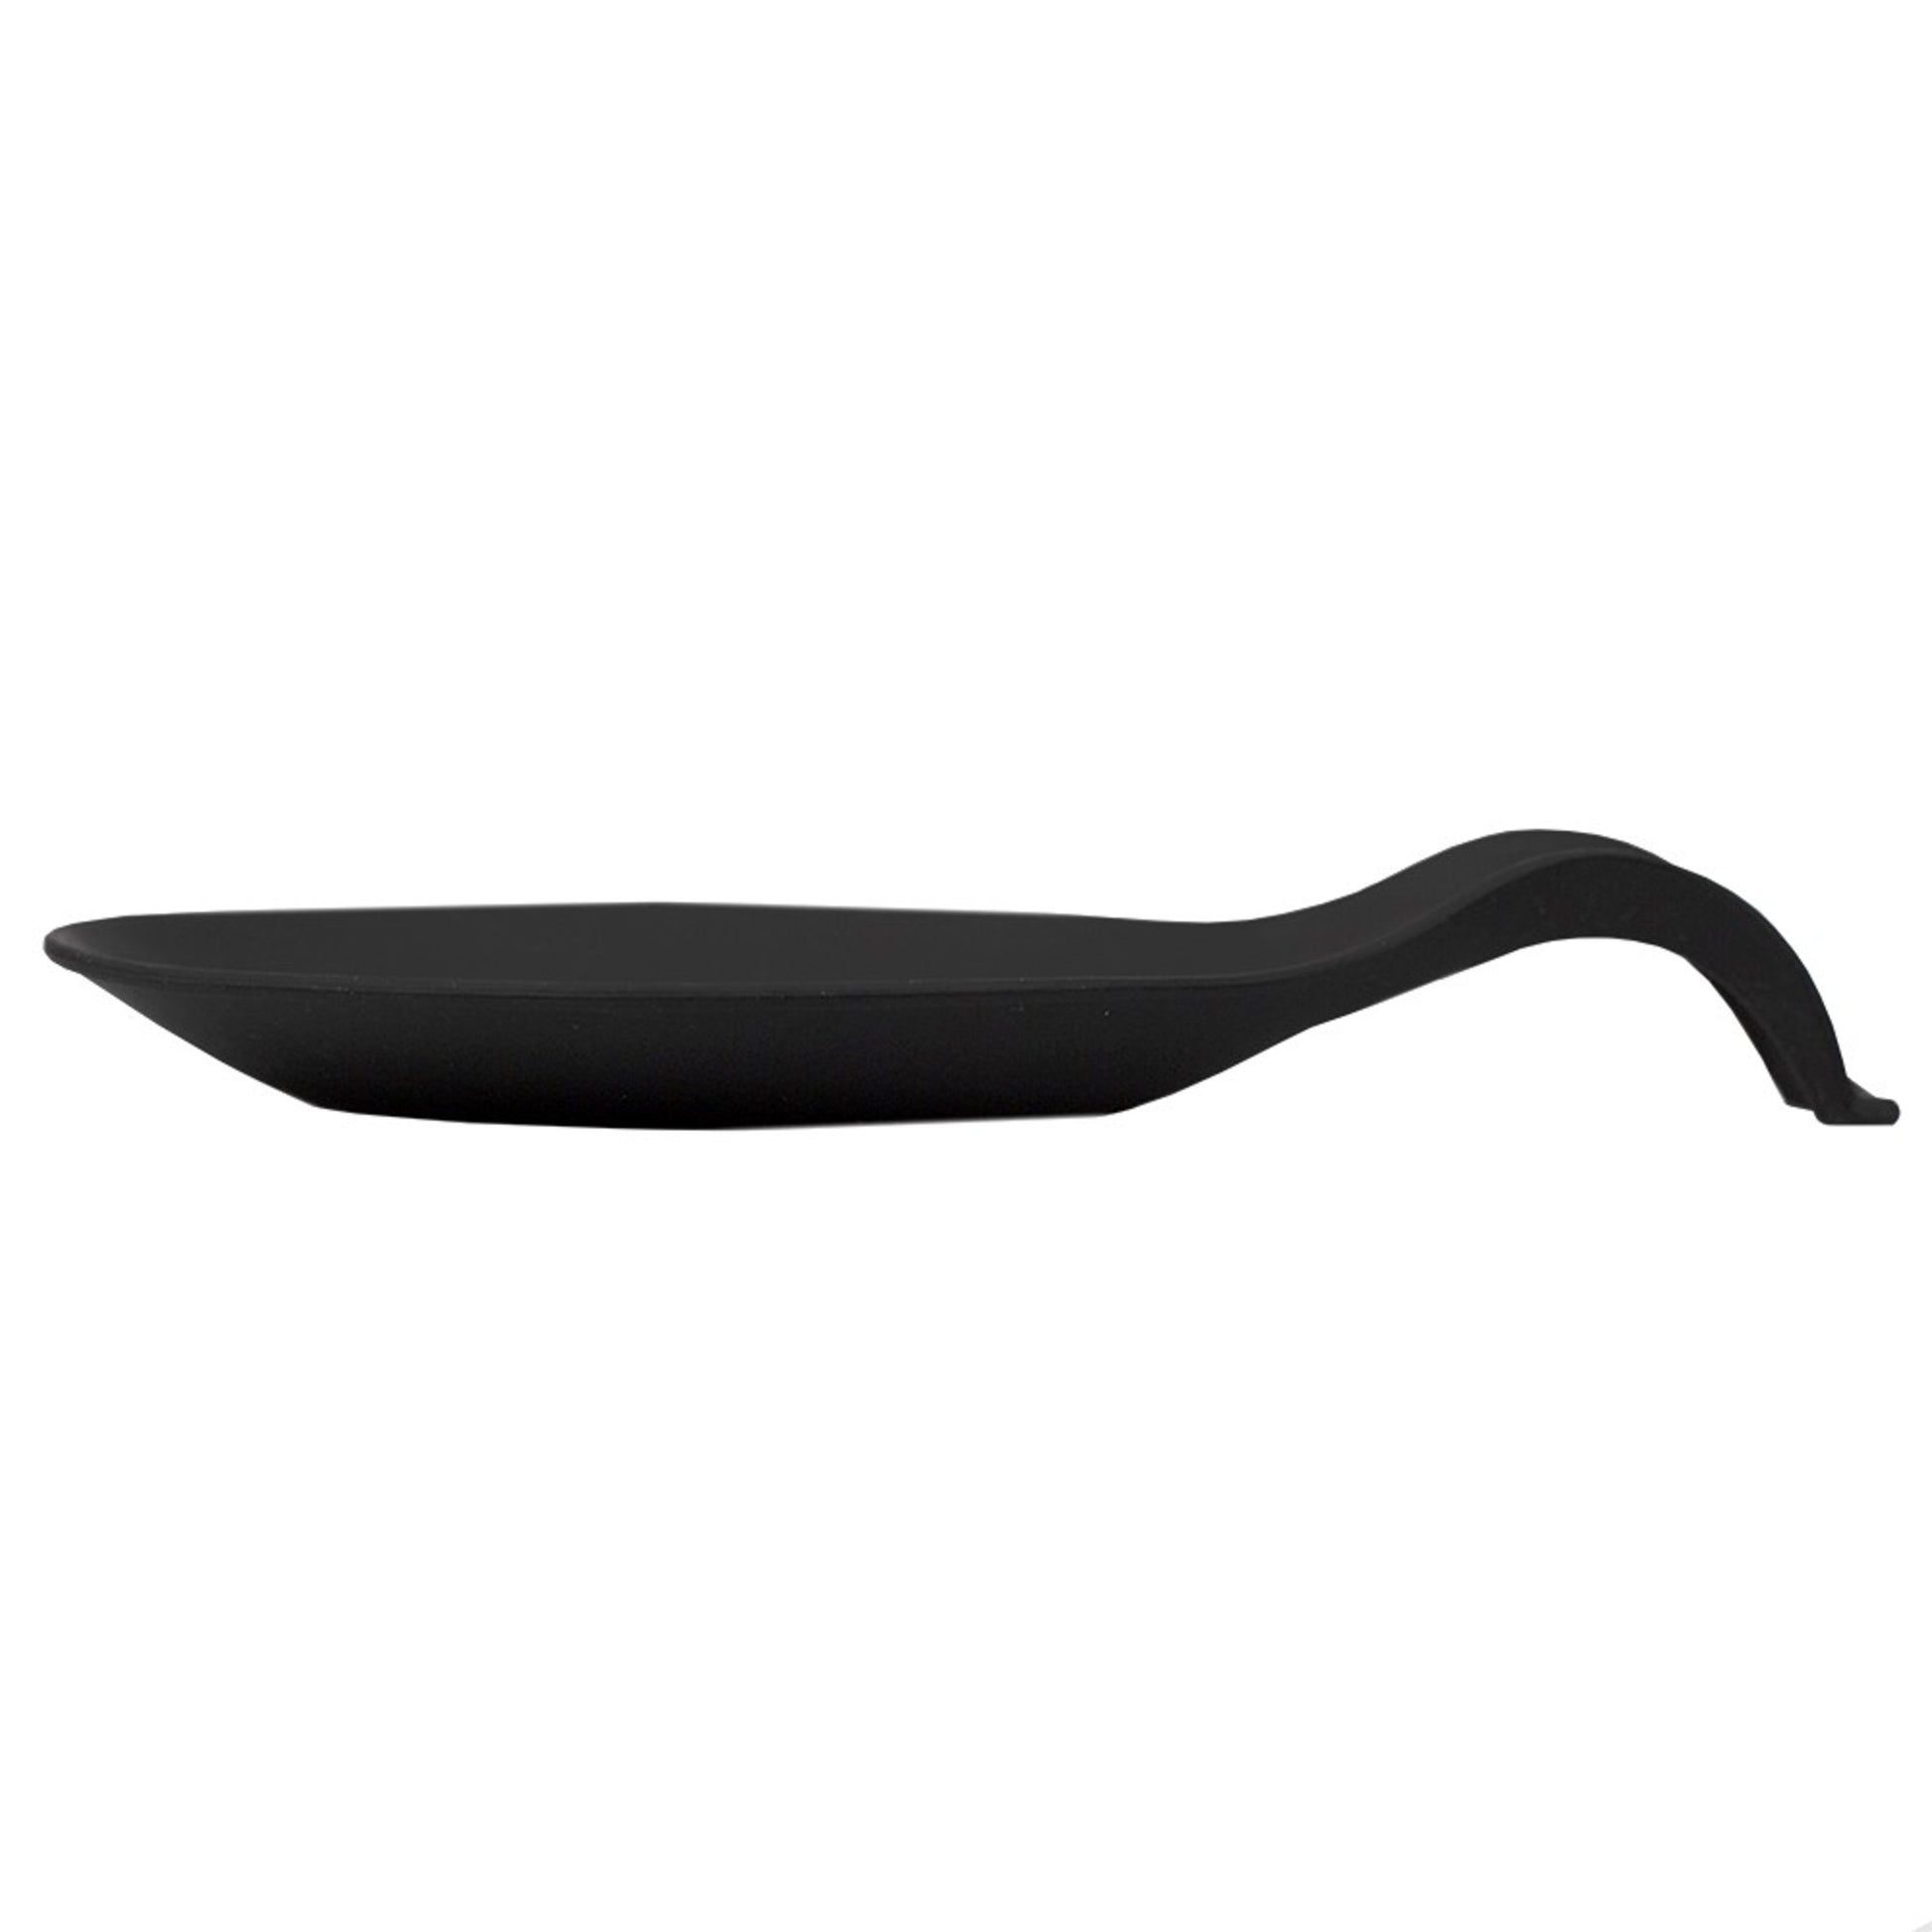 Home Basics Food Grade Flexible Silicone Oversized Almond Shaped Spoon Rest, Black - Black